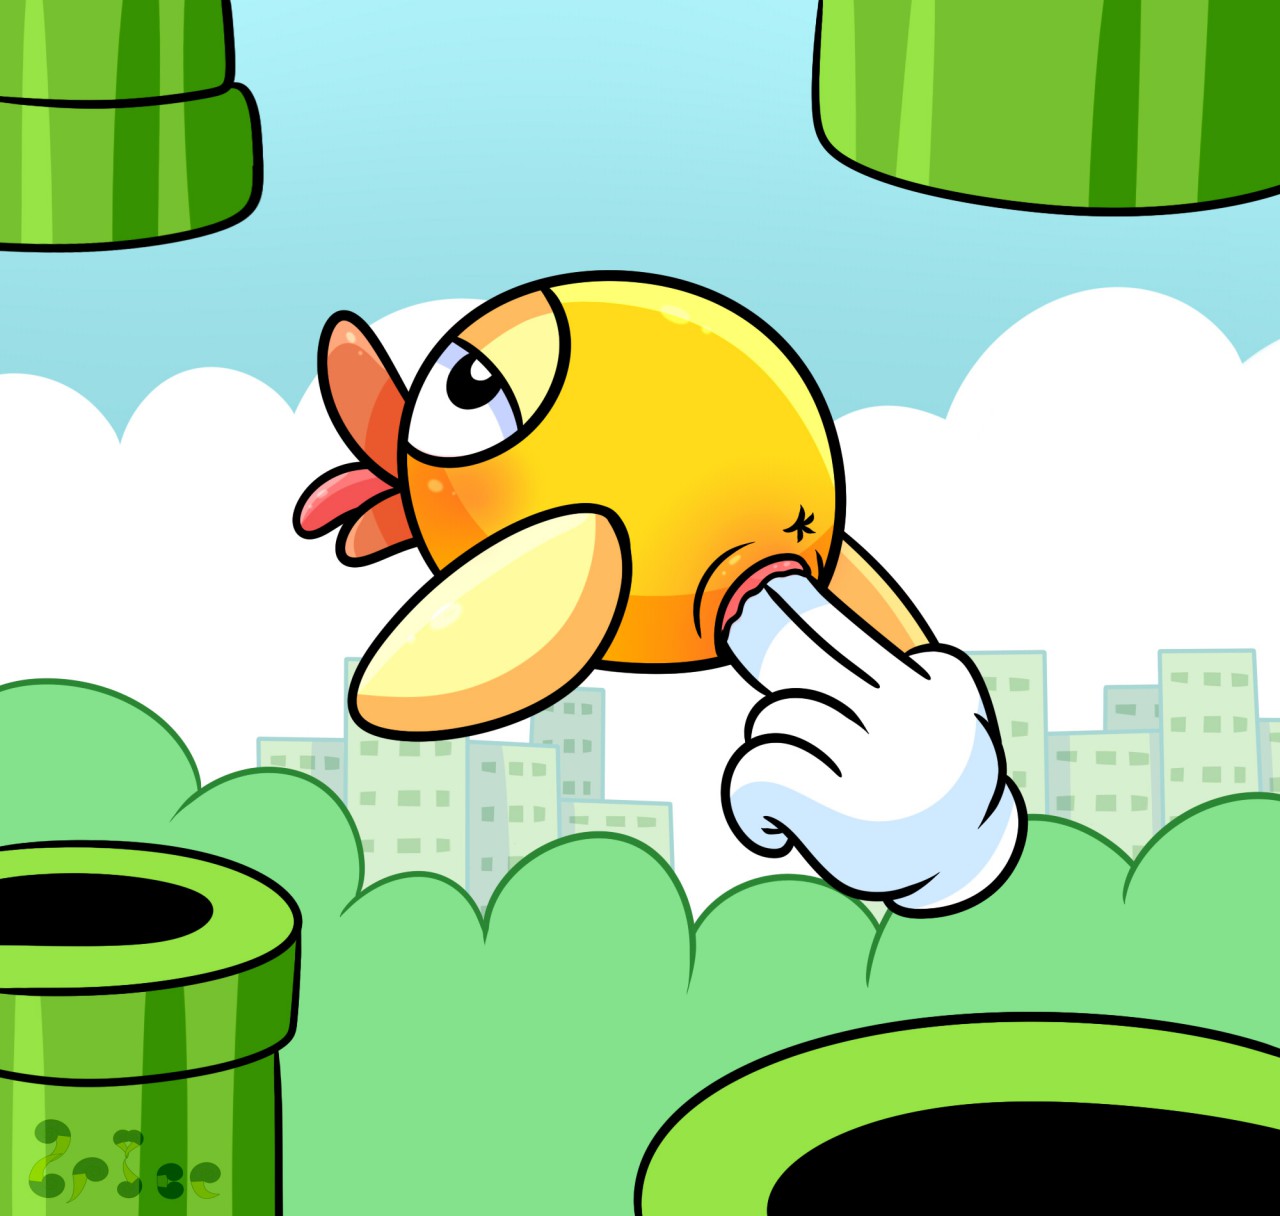 Flappy Bird Gets Naughty: Uncensored Images Galore